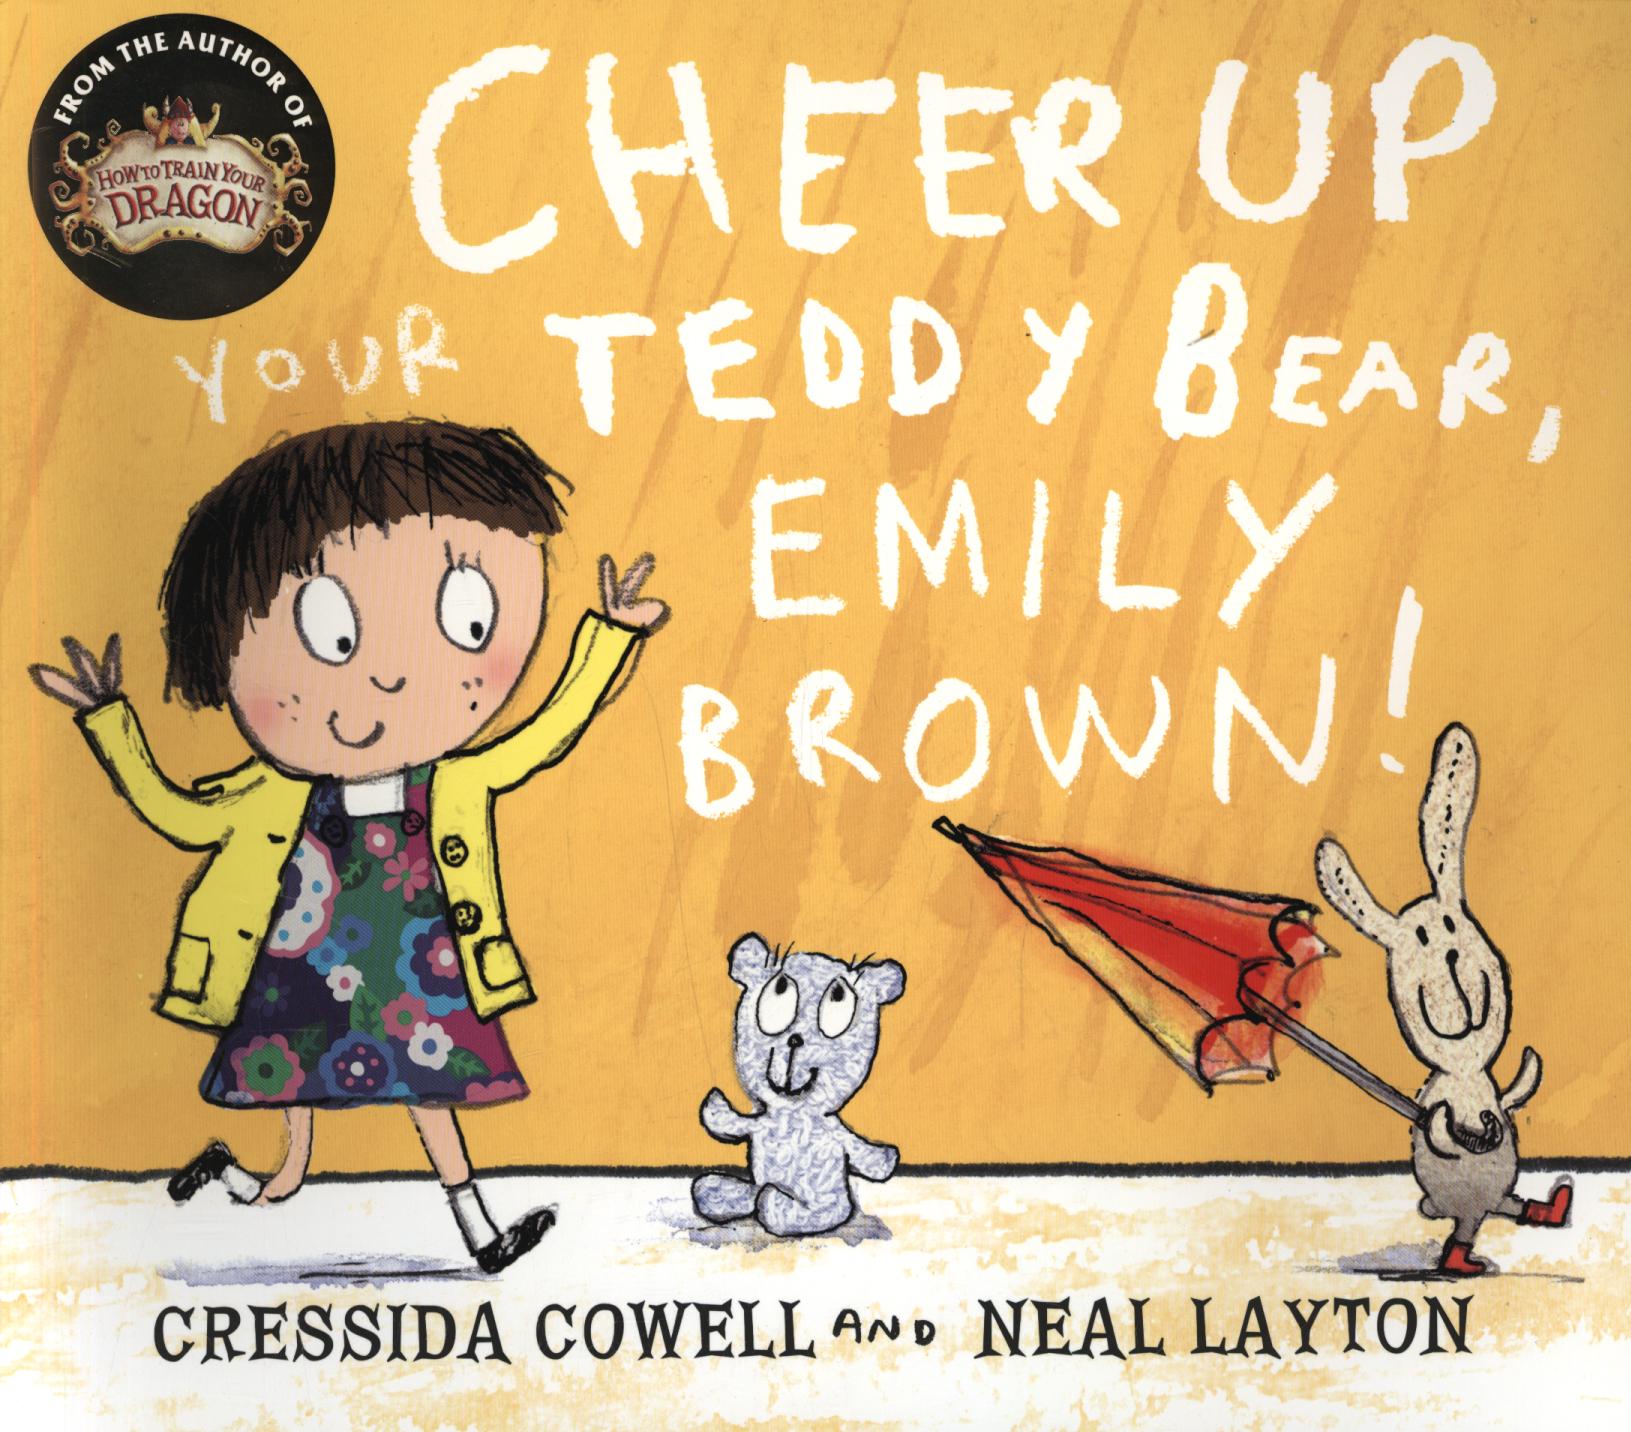 Cheer Up Your Teddy Bear, Emily Brown!